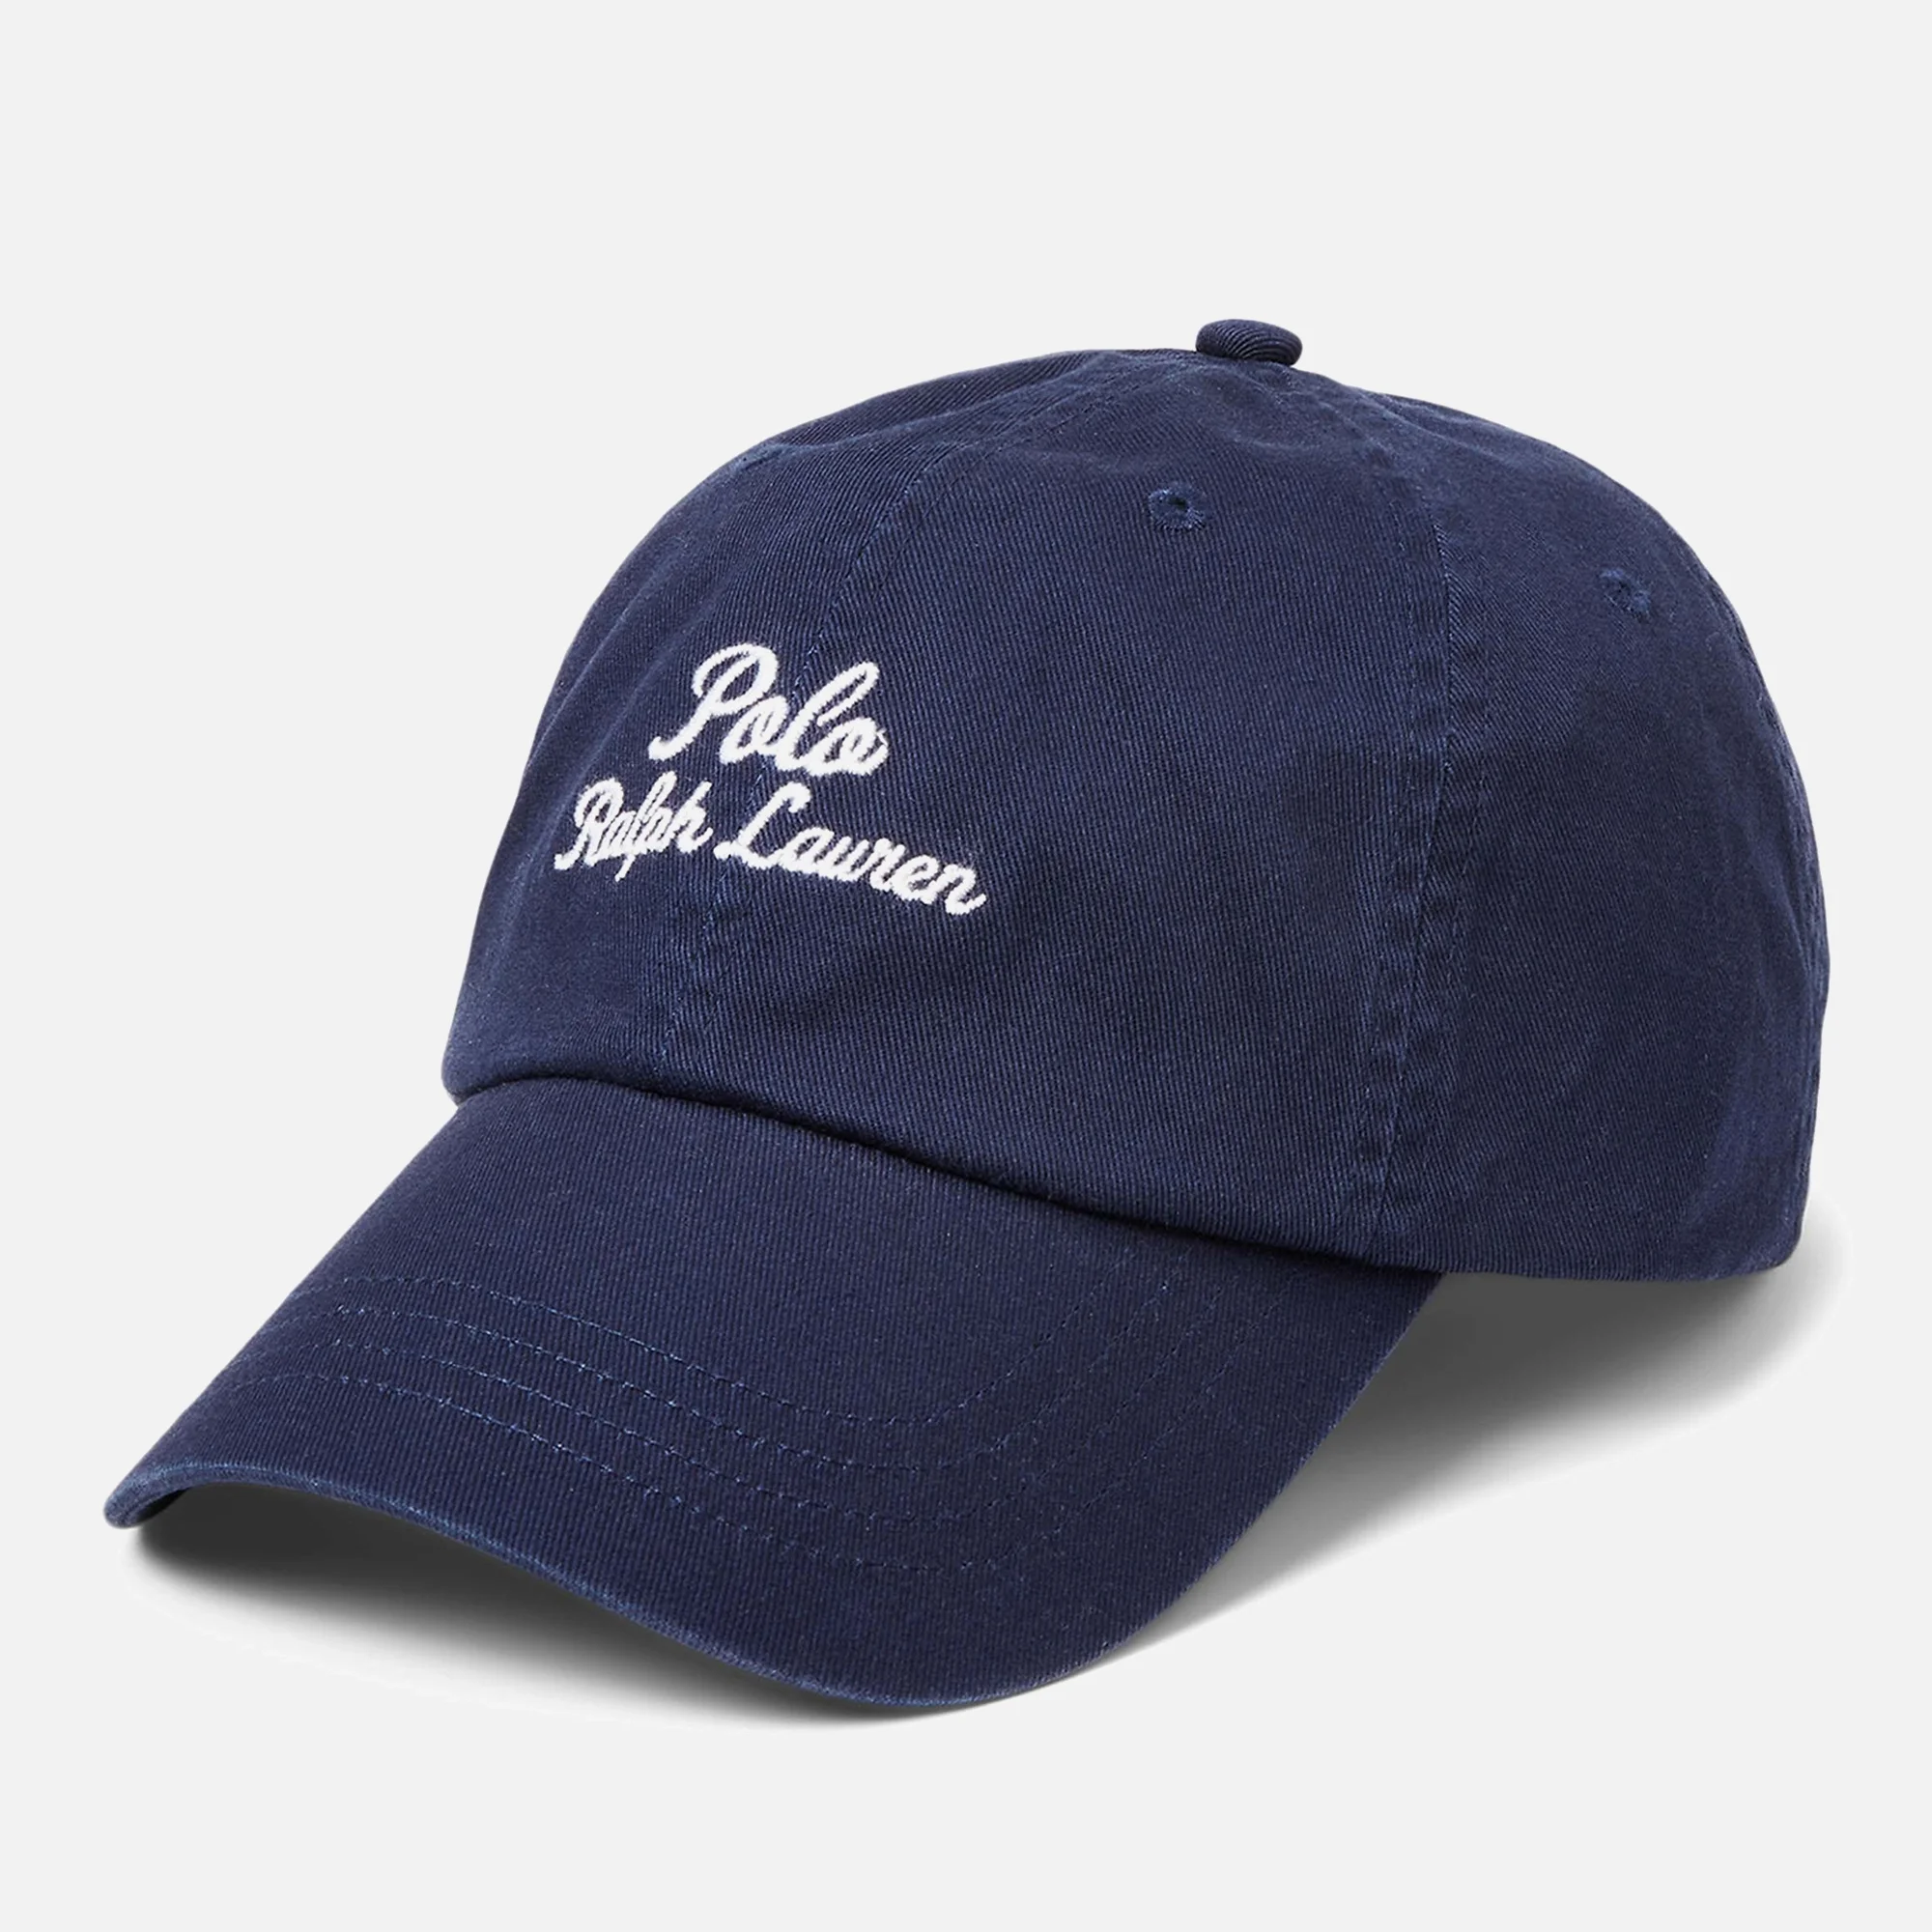 Polo Ralph Lauren Classic Embroidered Cotton-Twill Sports Cap Image 1